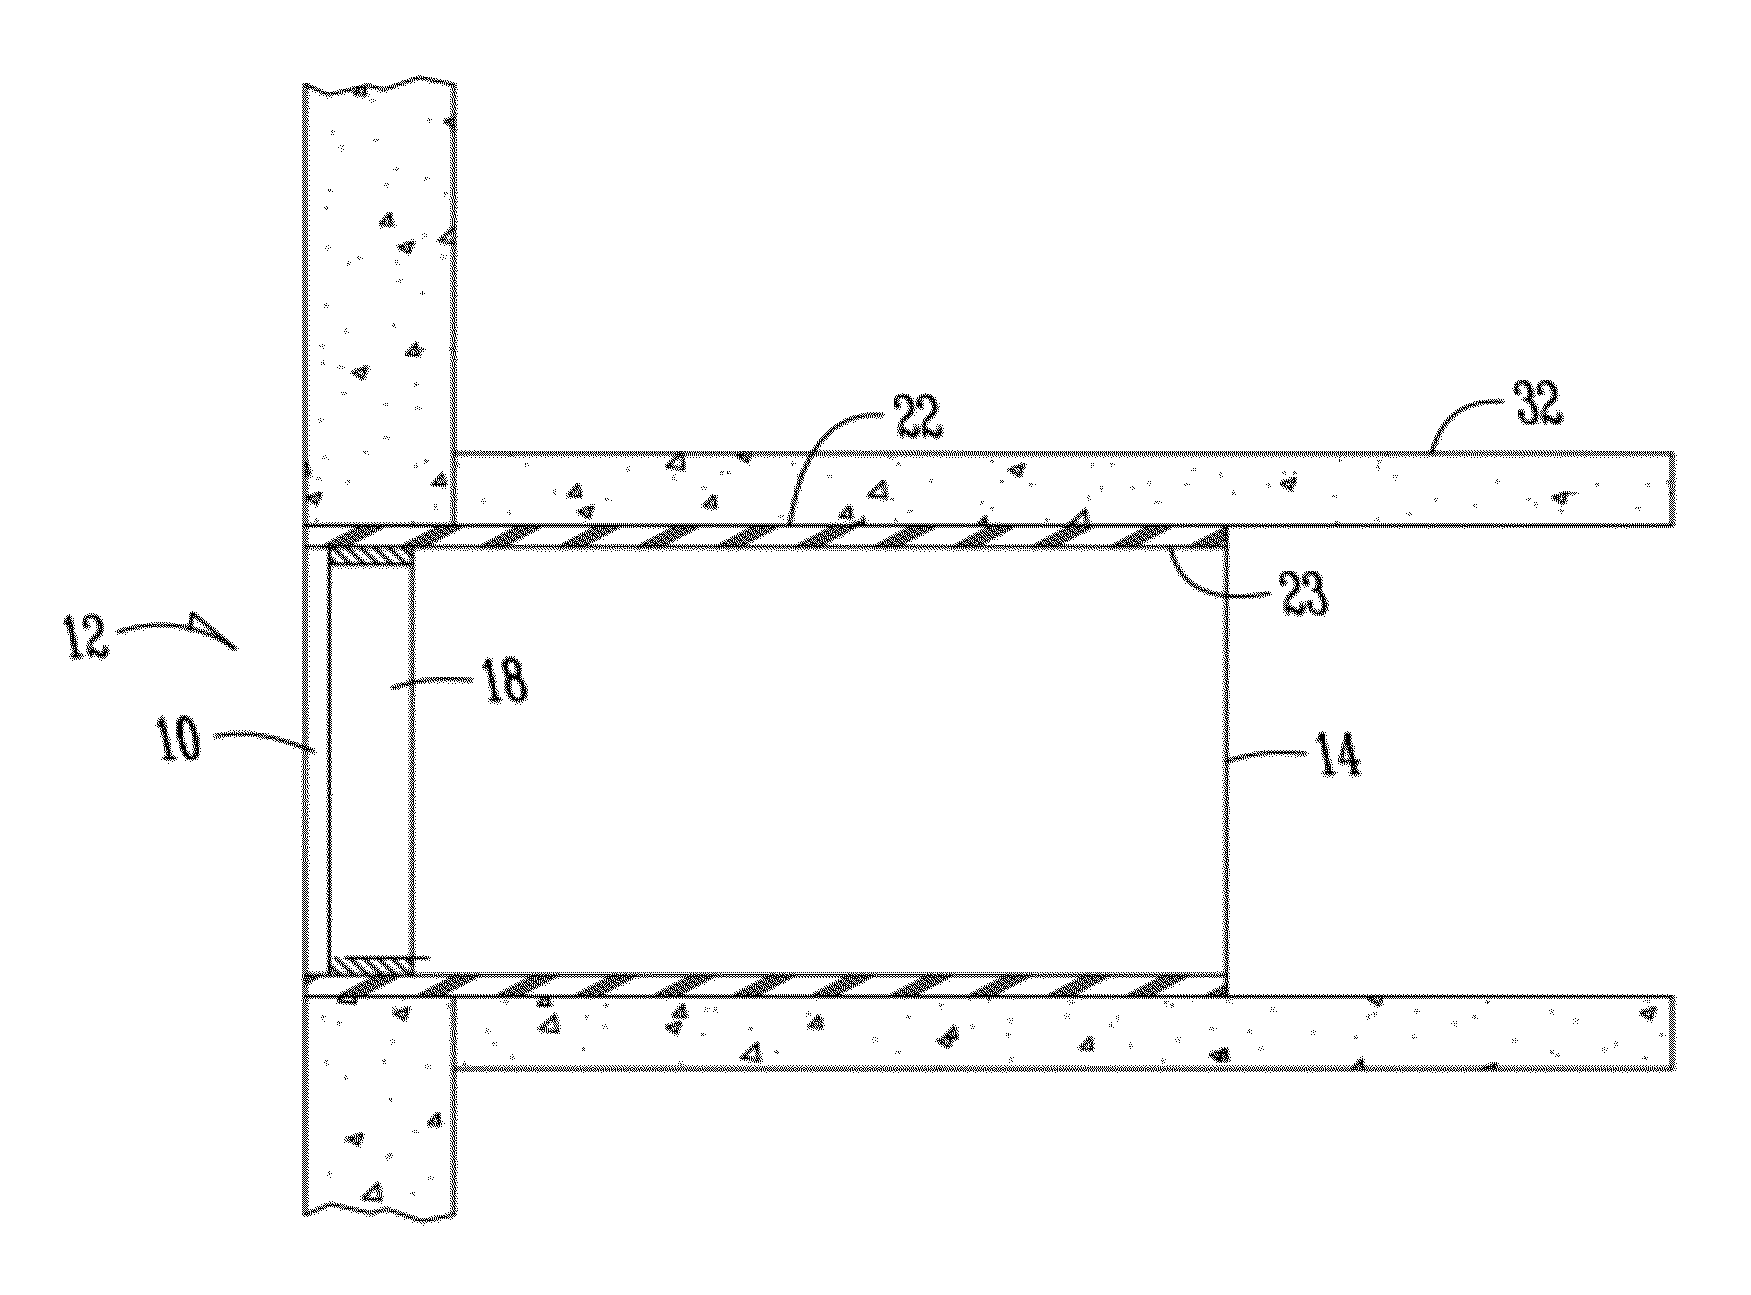 Apparatus and method for sealing pipes and underground structures